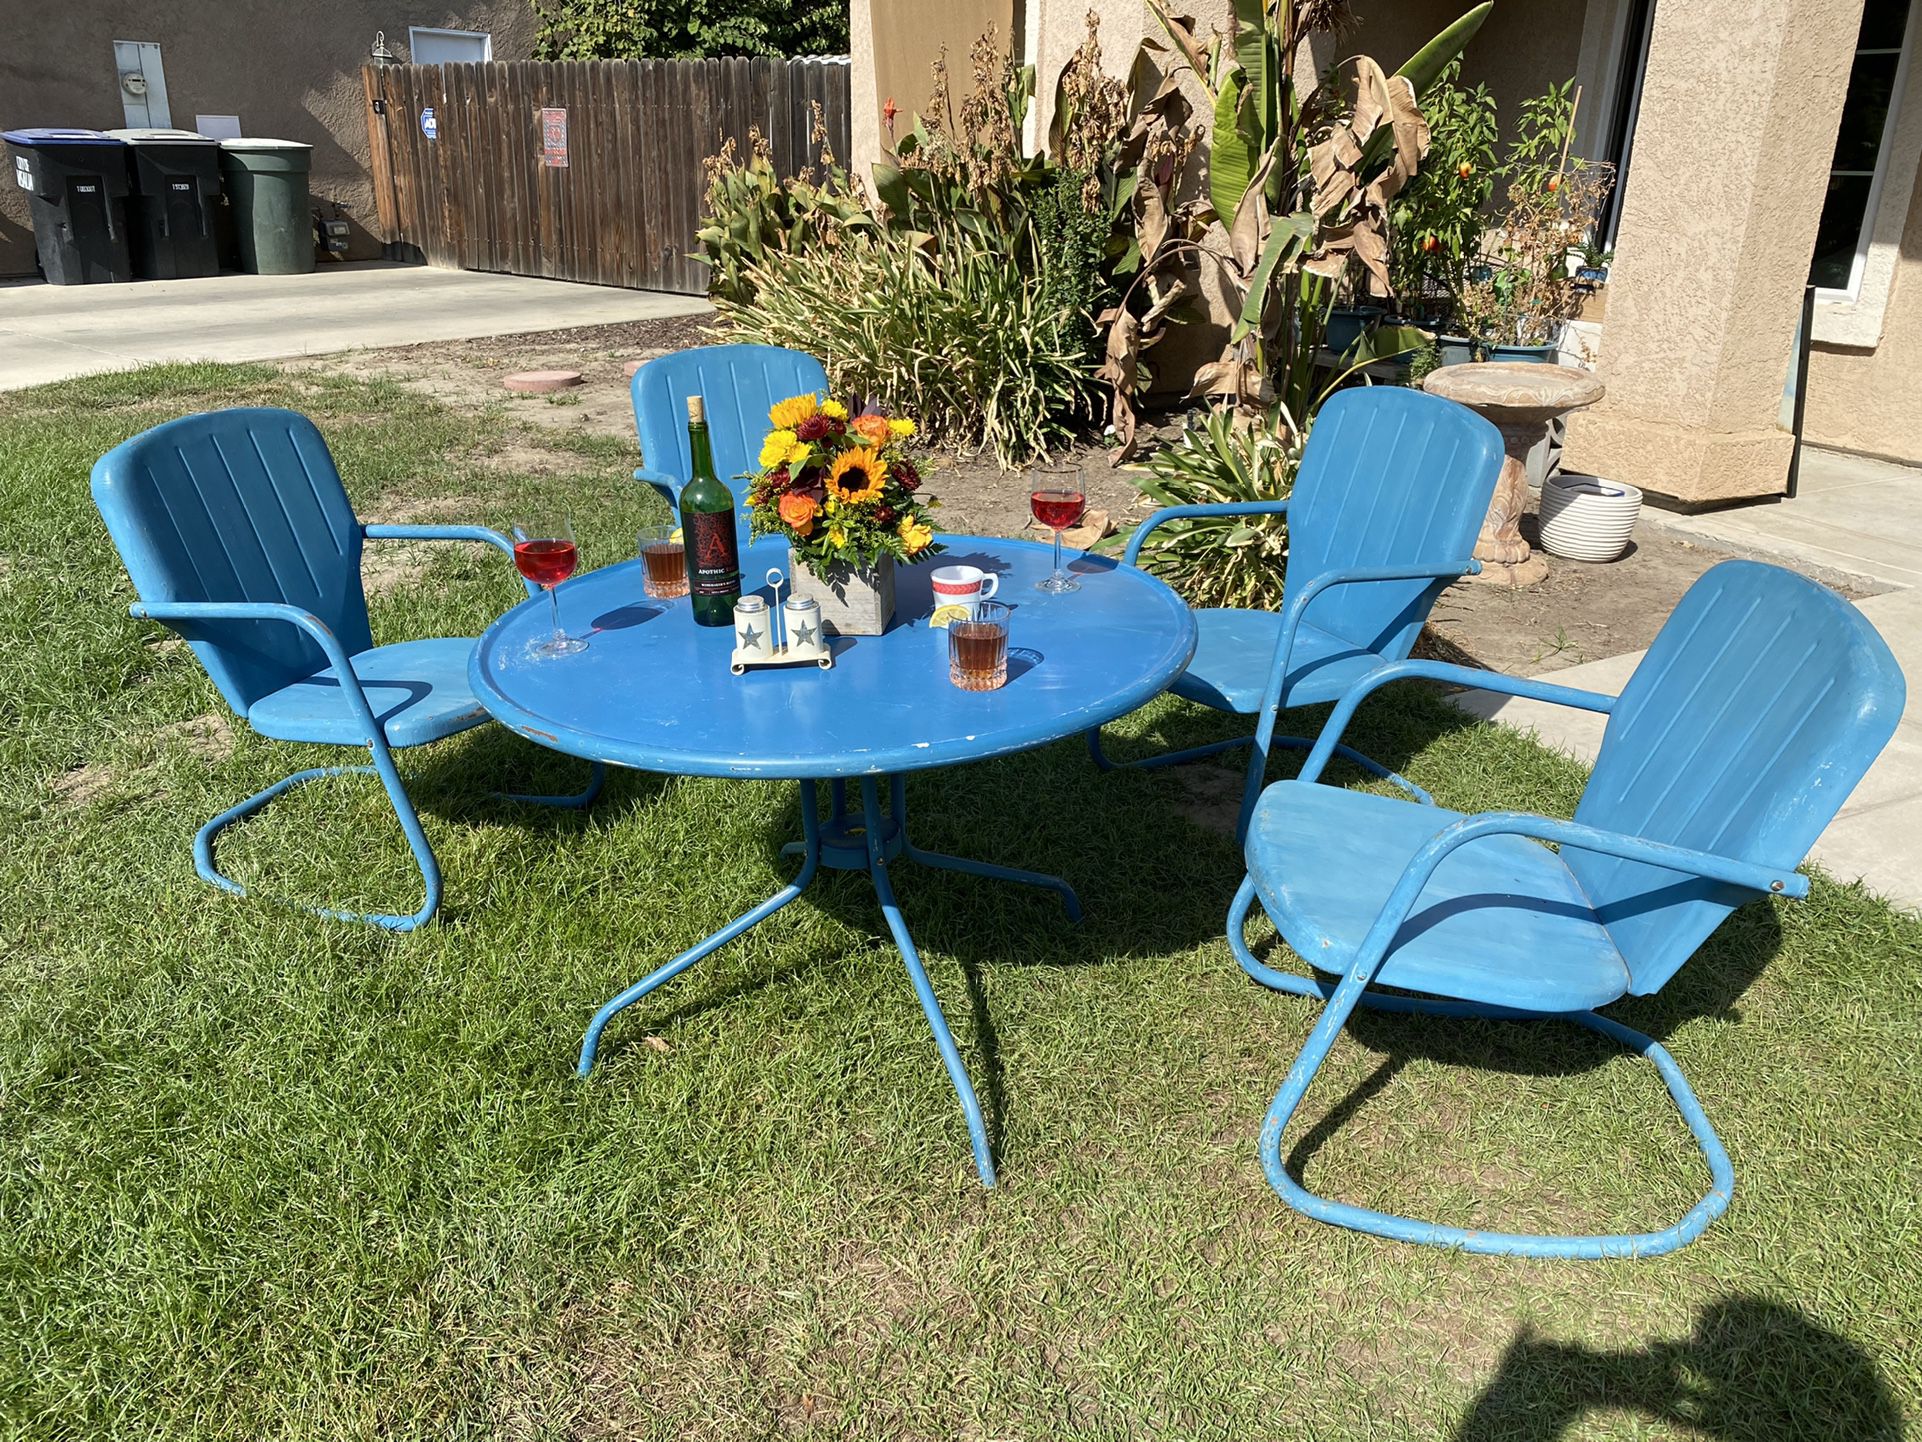 Vintage Metallic Table And Chairs  Lawn Garden Porch 